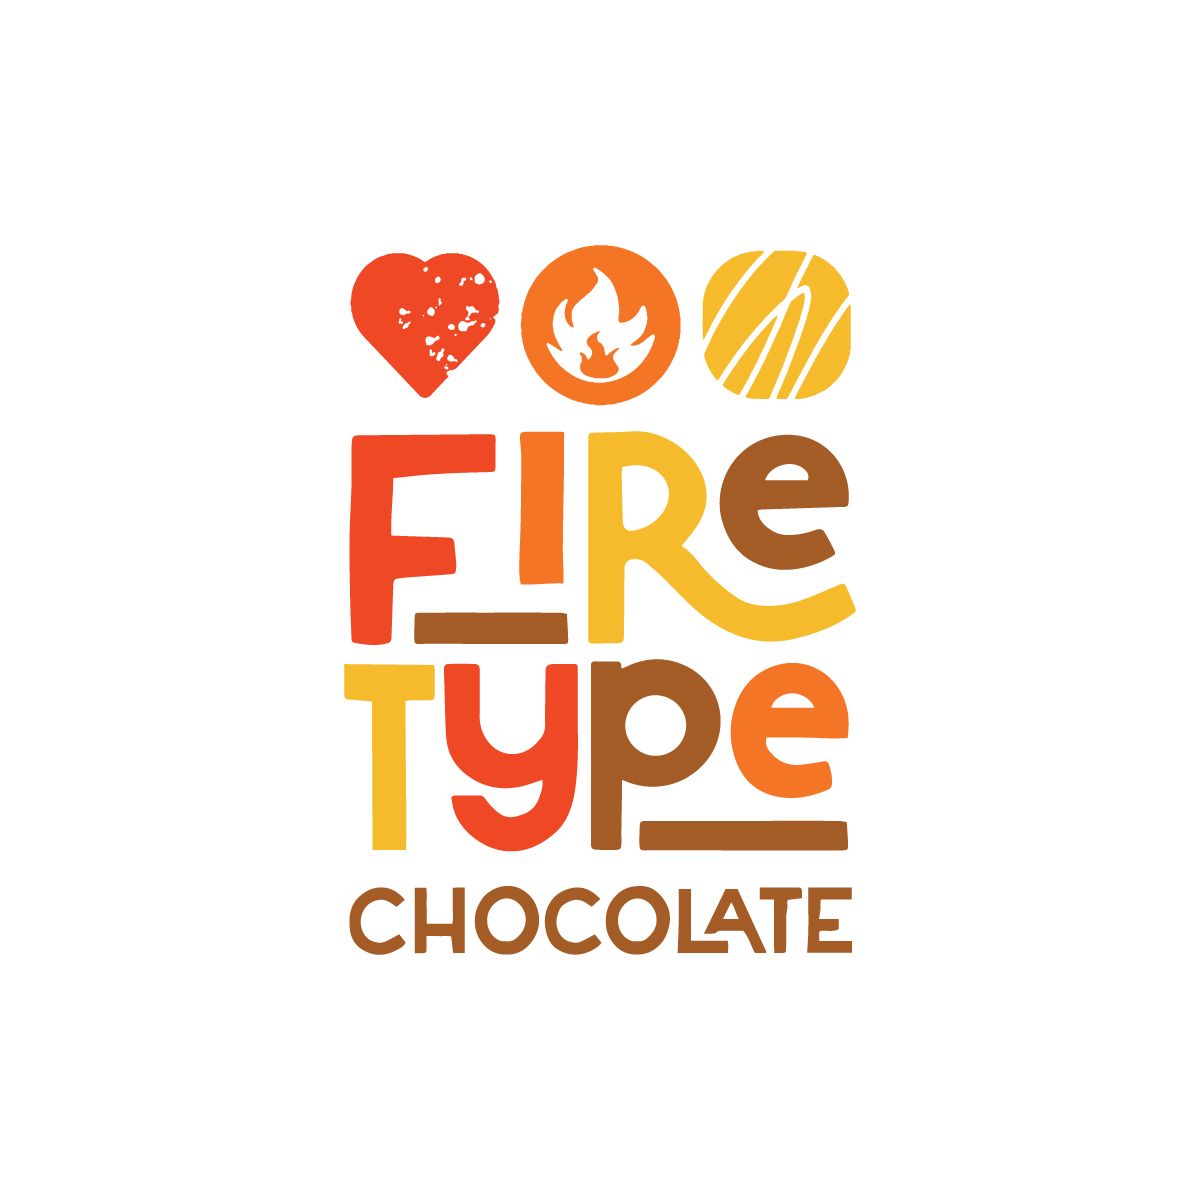 Firetype Chocolate creates beautiful and unique chocolate treats, with flavors that will light your fire!